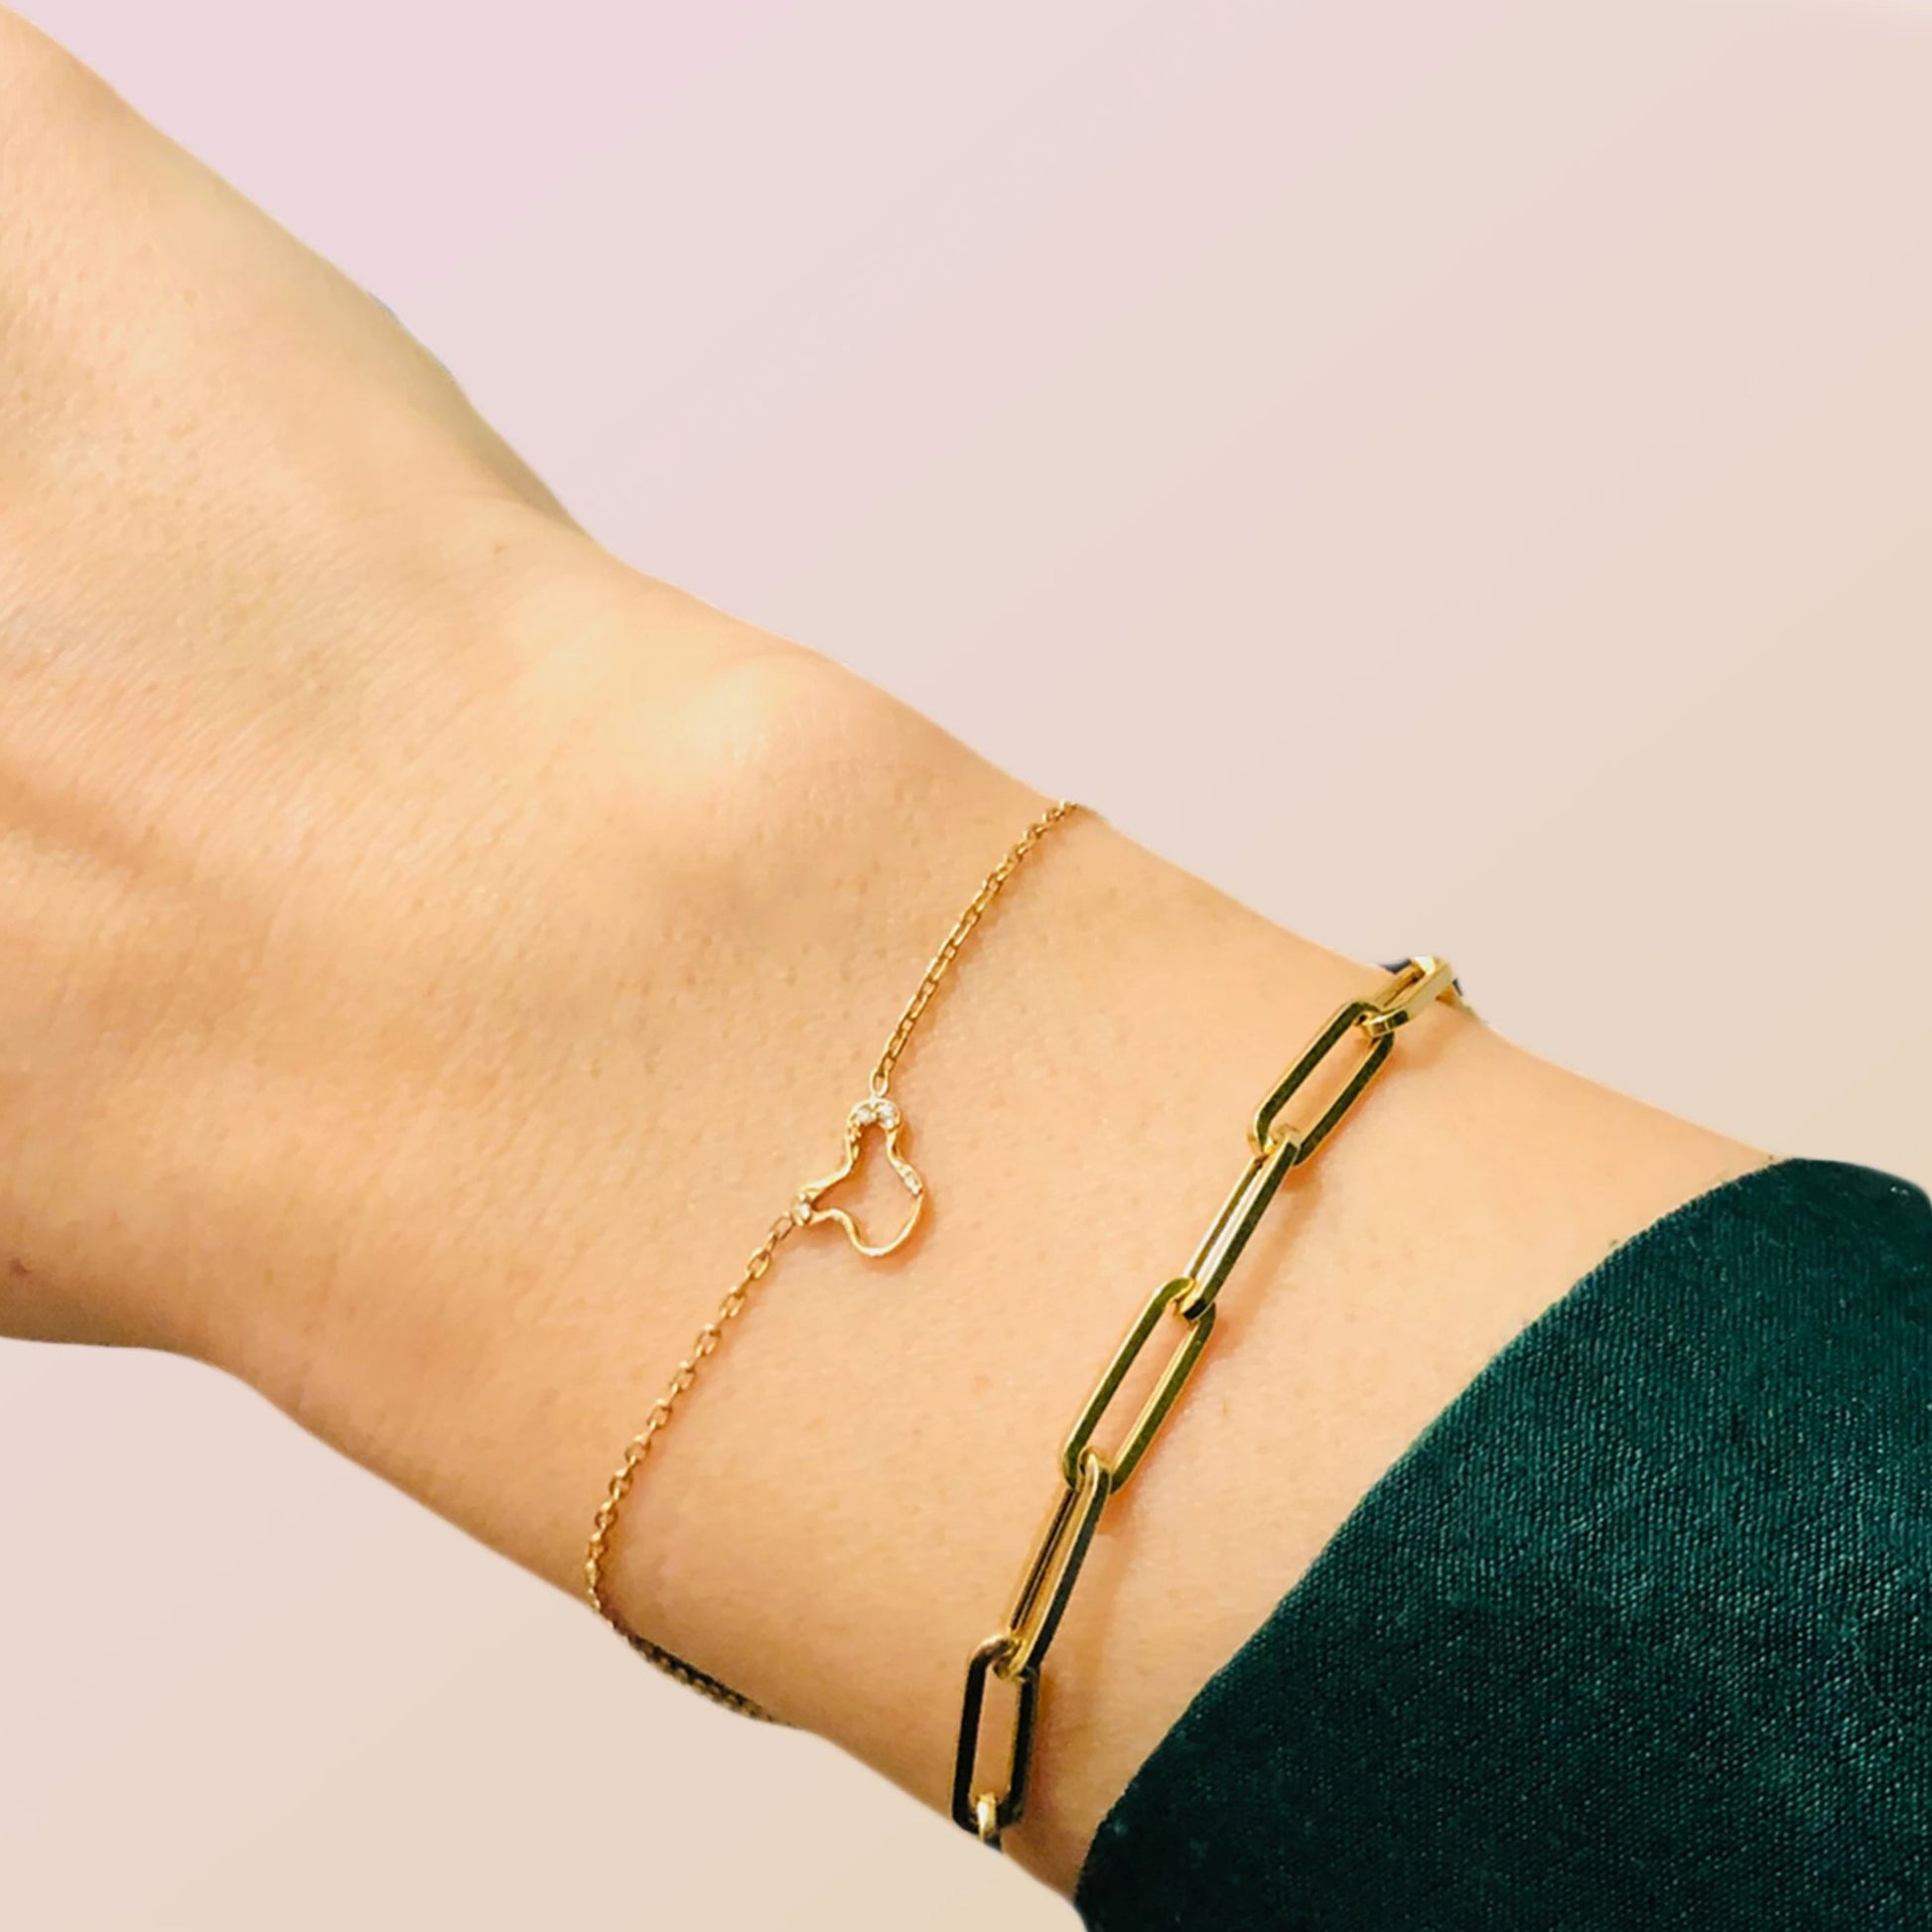 14k gold Chunky Paperclip Chain Bracelet with a lobster clasp styled on a wrist with a ripple chain bracelet.